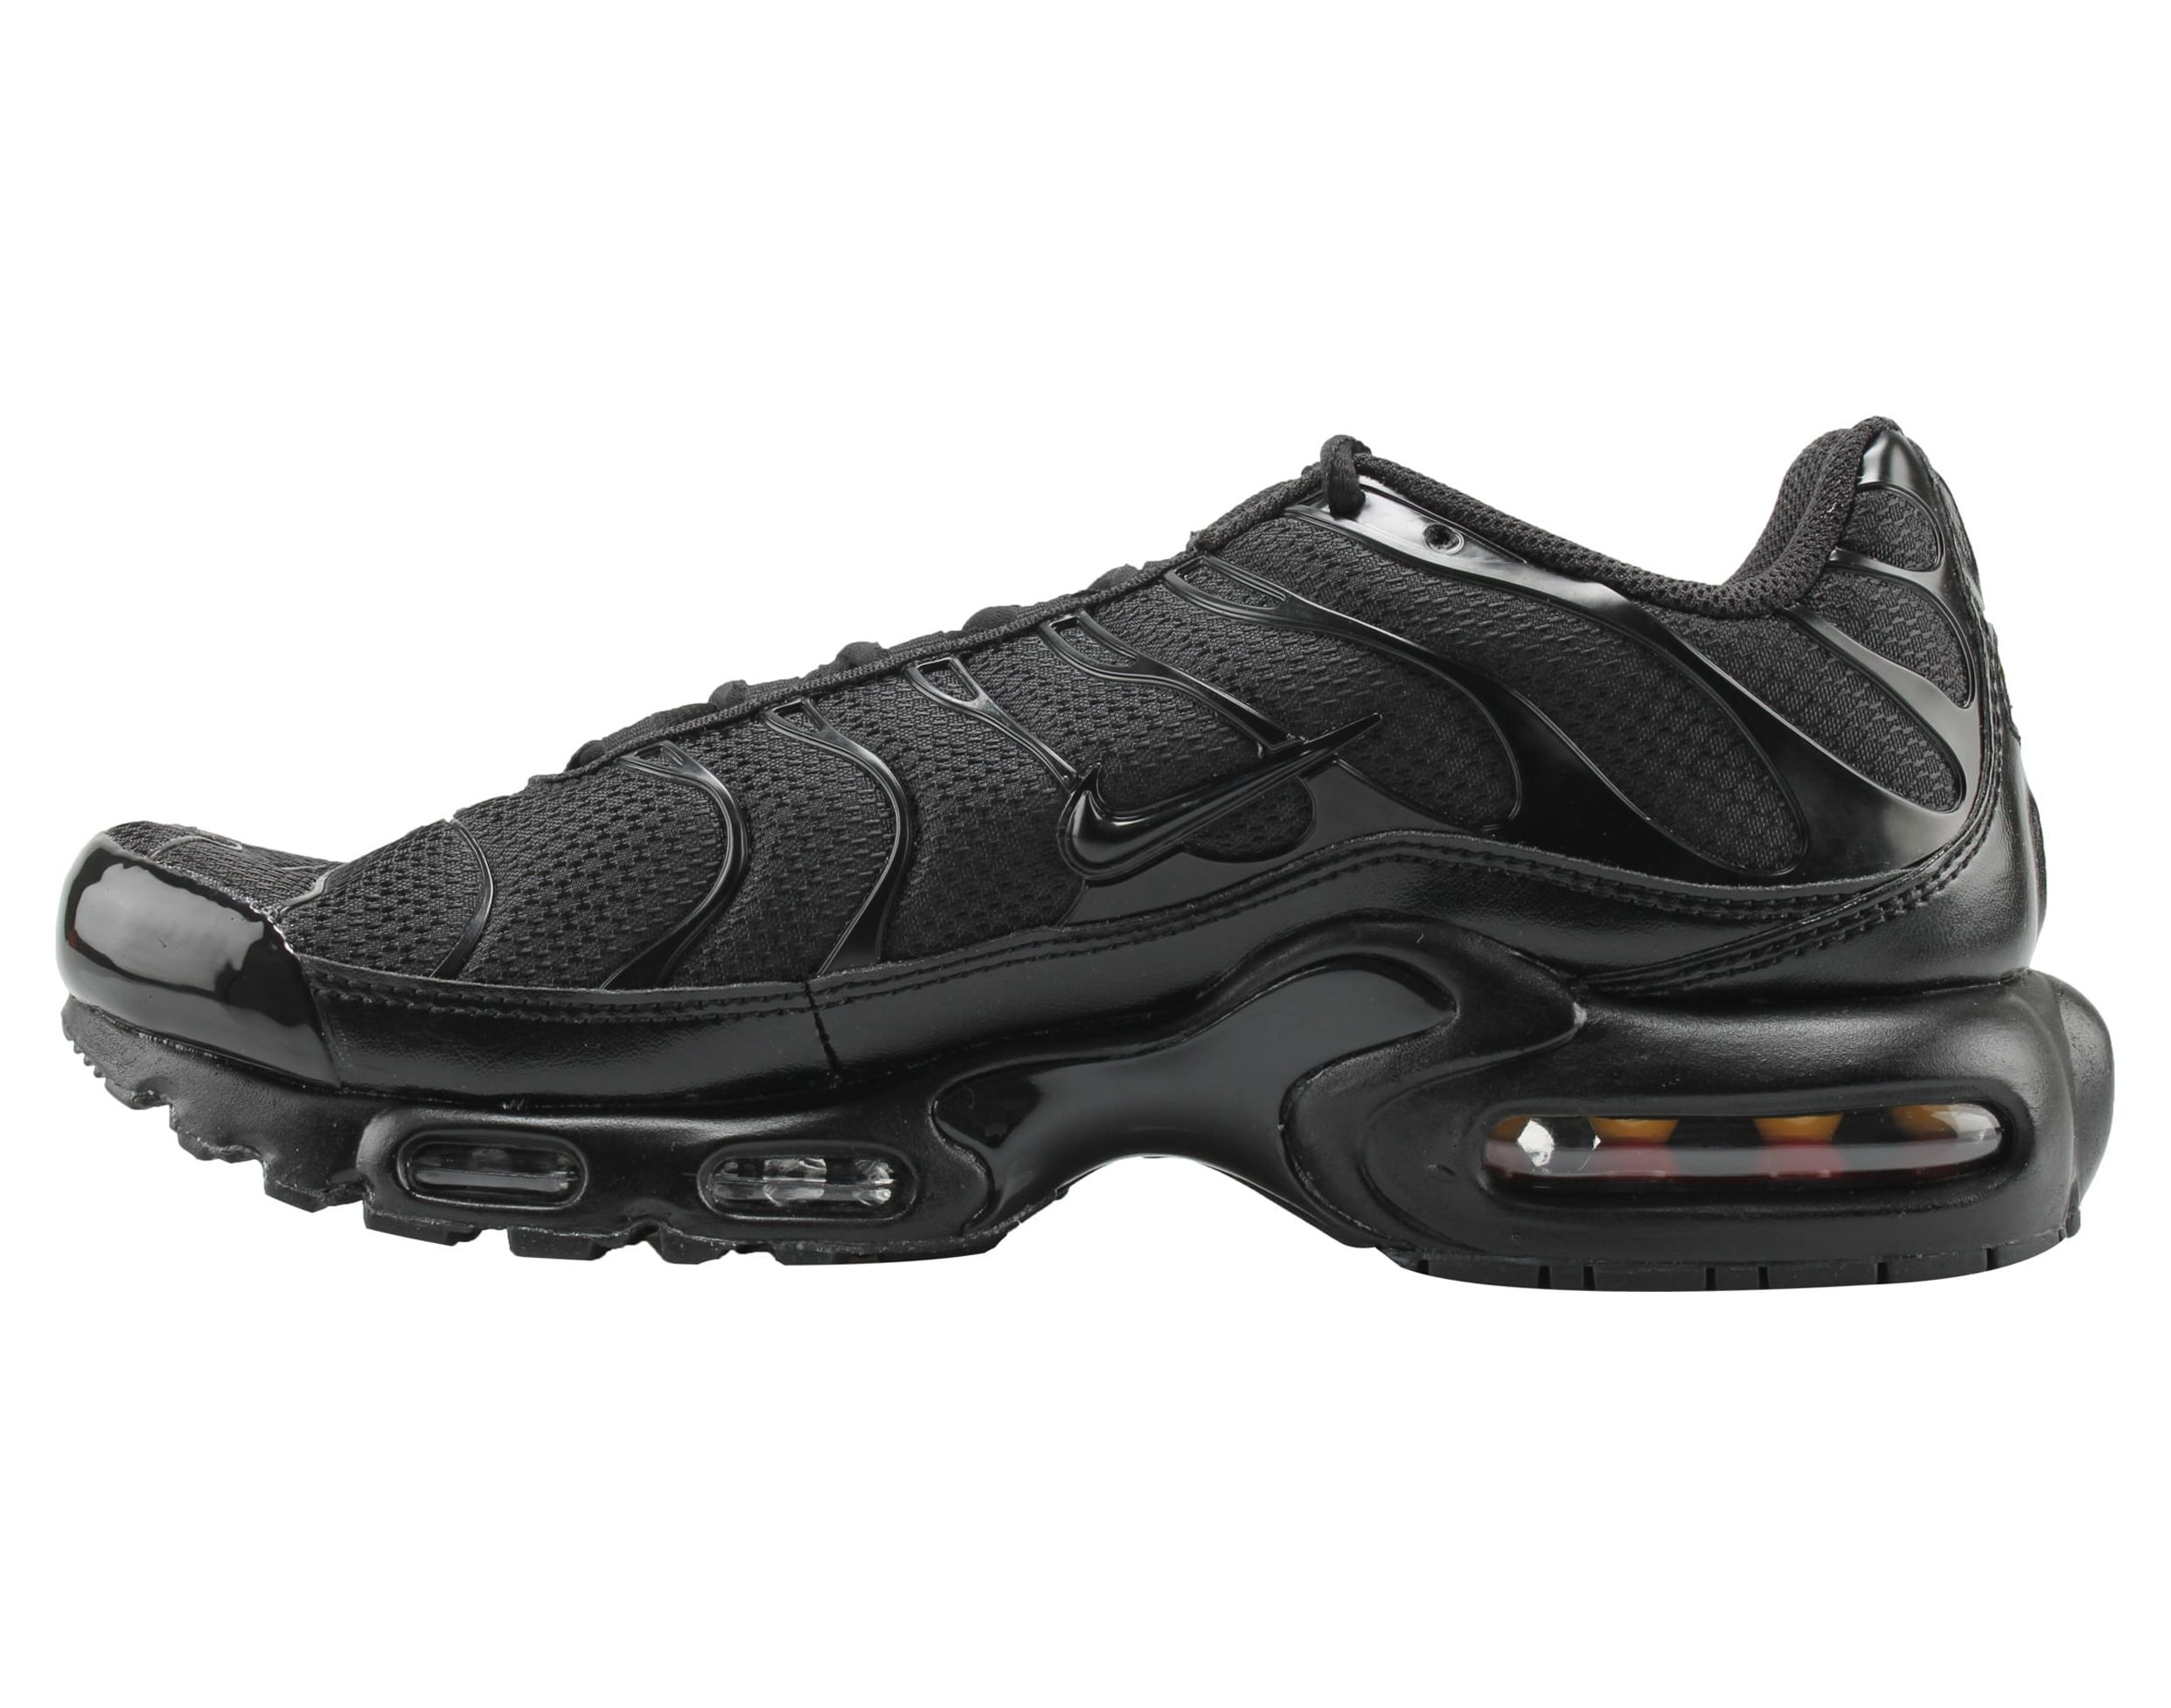 Nike Men's Air Max Plus Tuned 1 Fabric Trainer Shoes - image 3 of 6